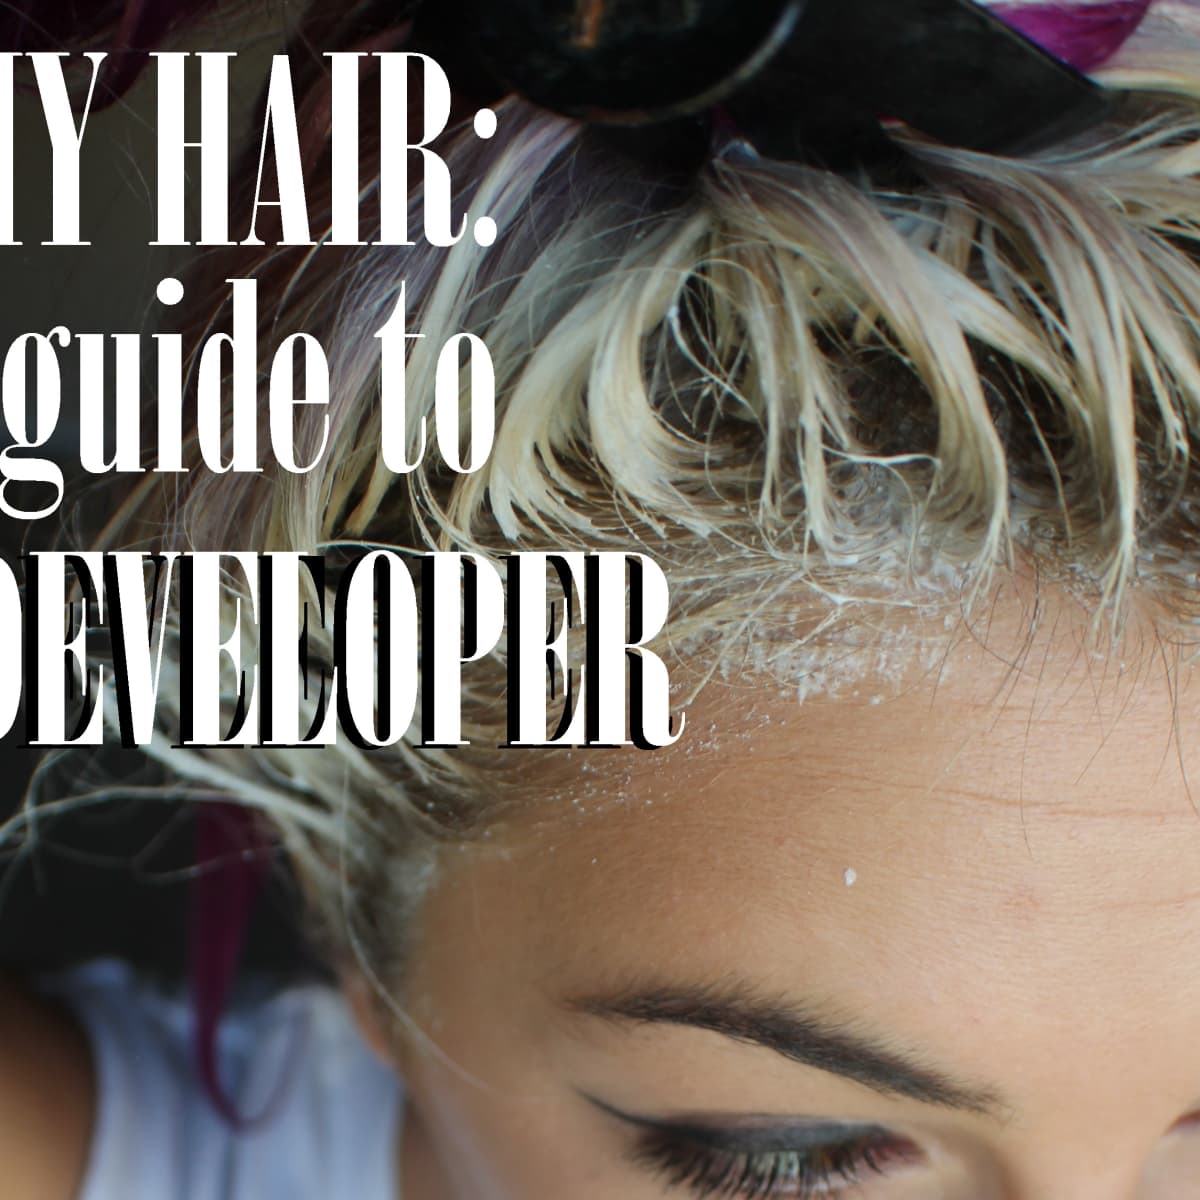 DIY Hair: What Is Developer and How Do You Use It? - Bellatory